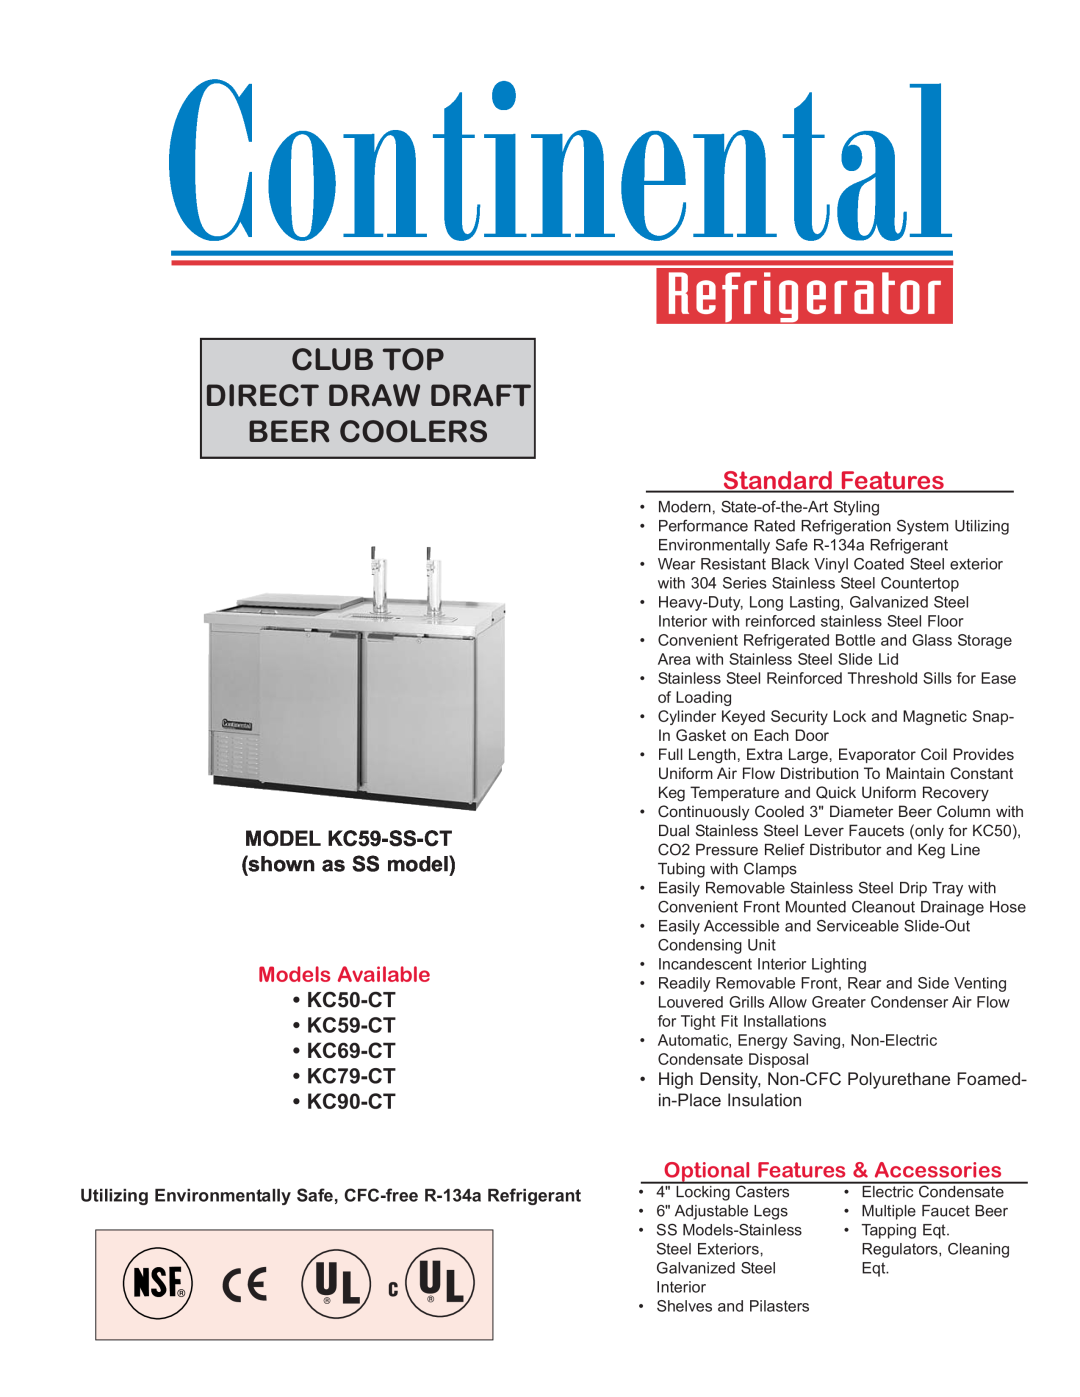 Continental Refrigerator KC79-CT manual Club Top Direct Draw Draft Beer Coolers, Standard Features, Models Available 